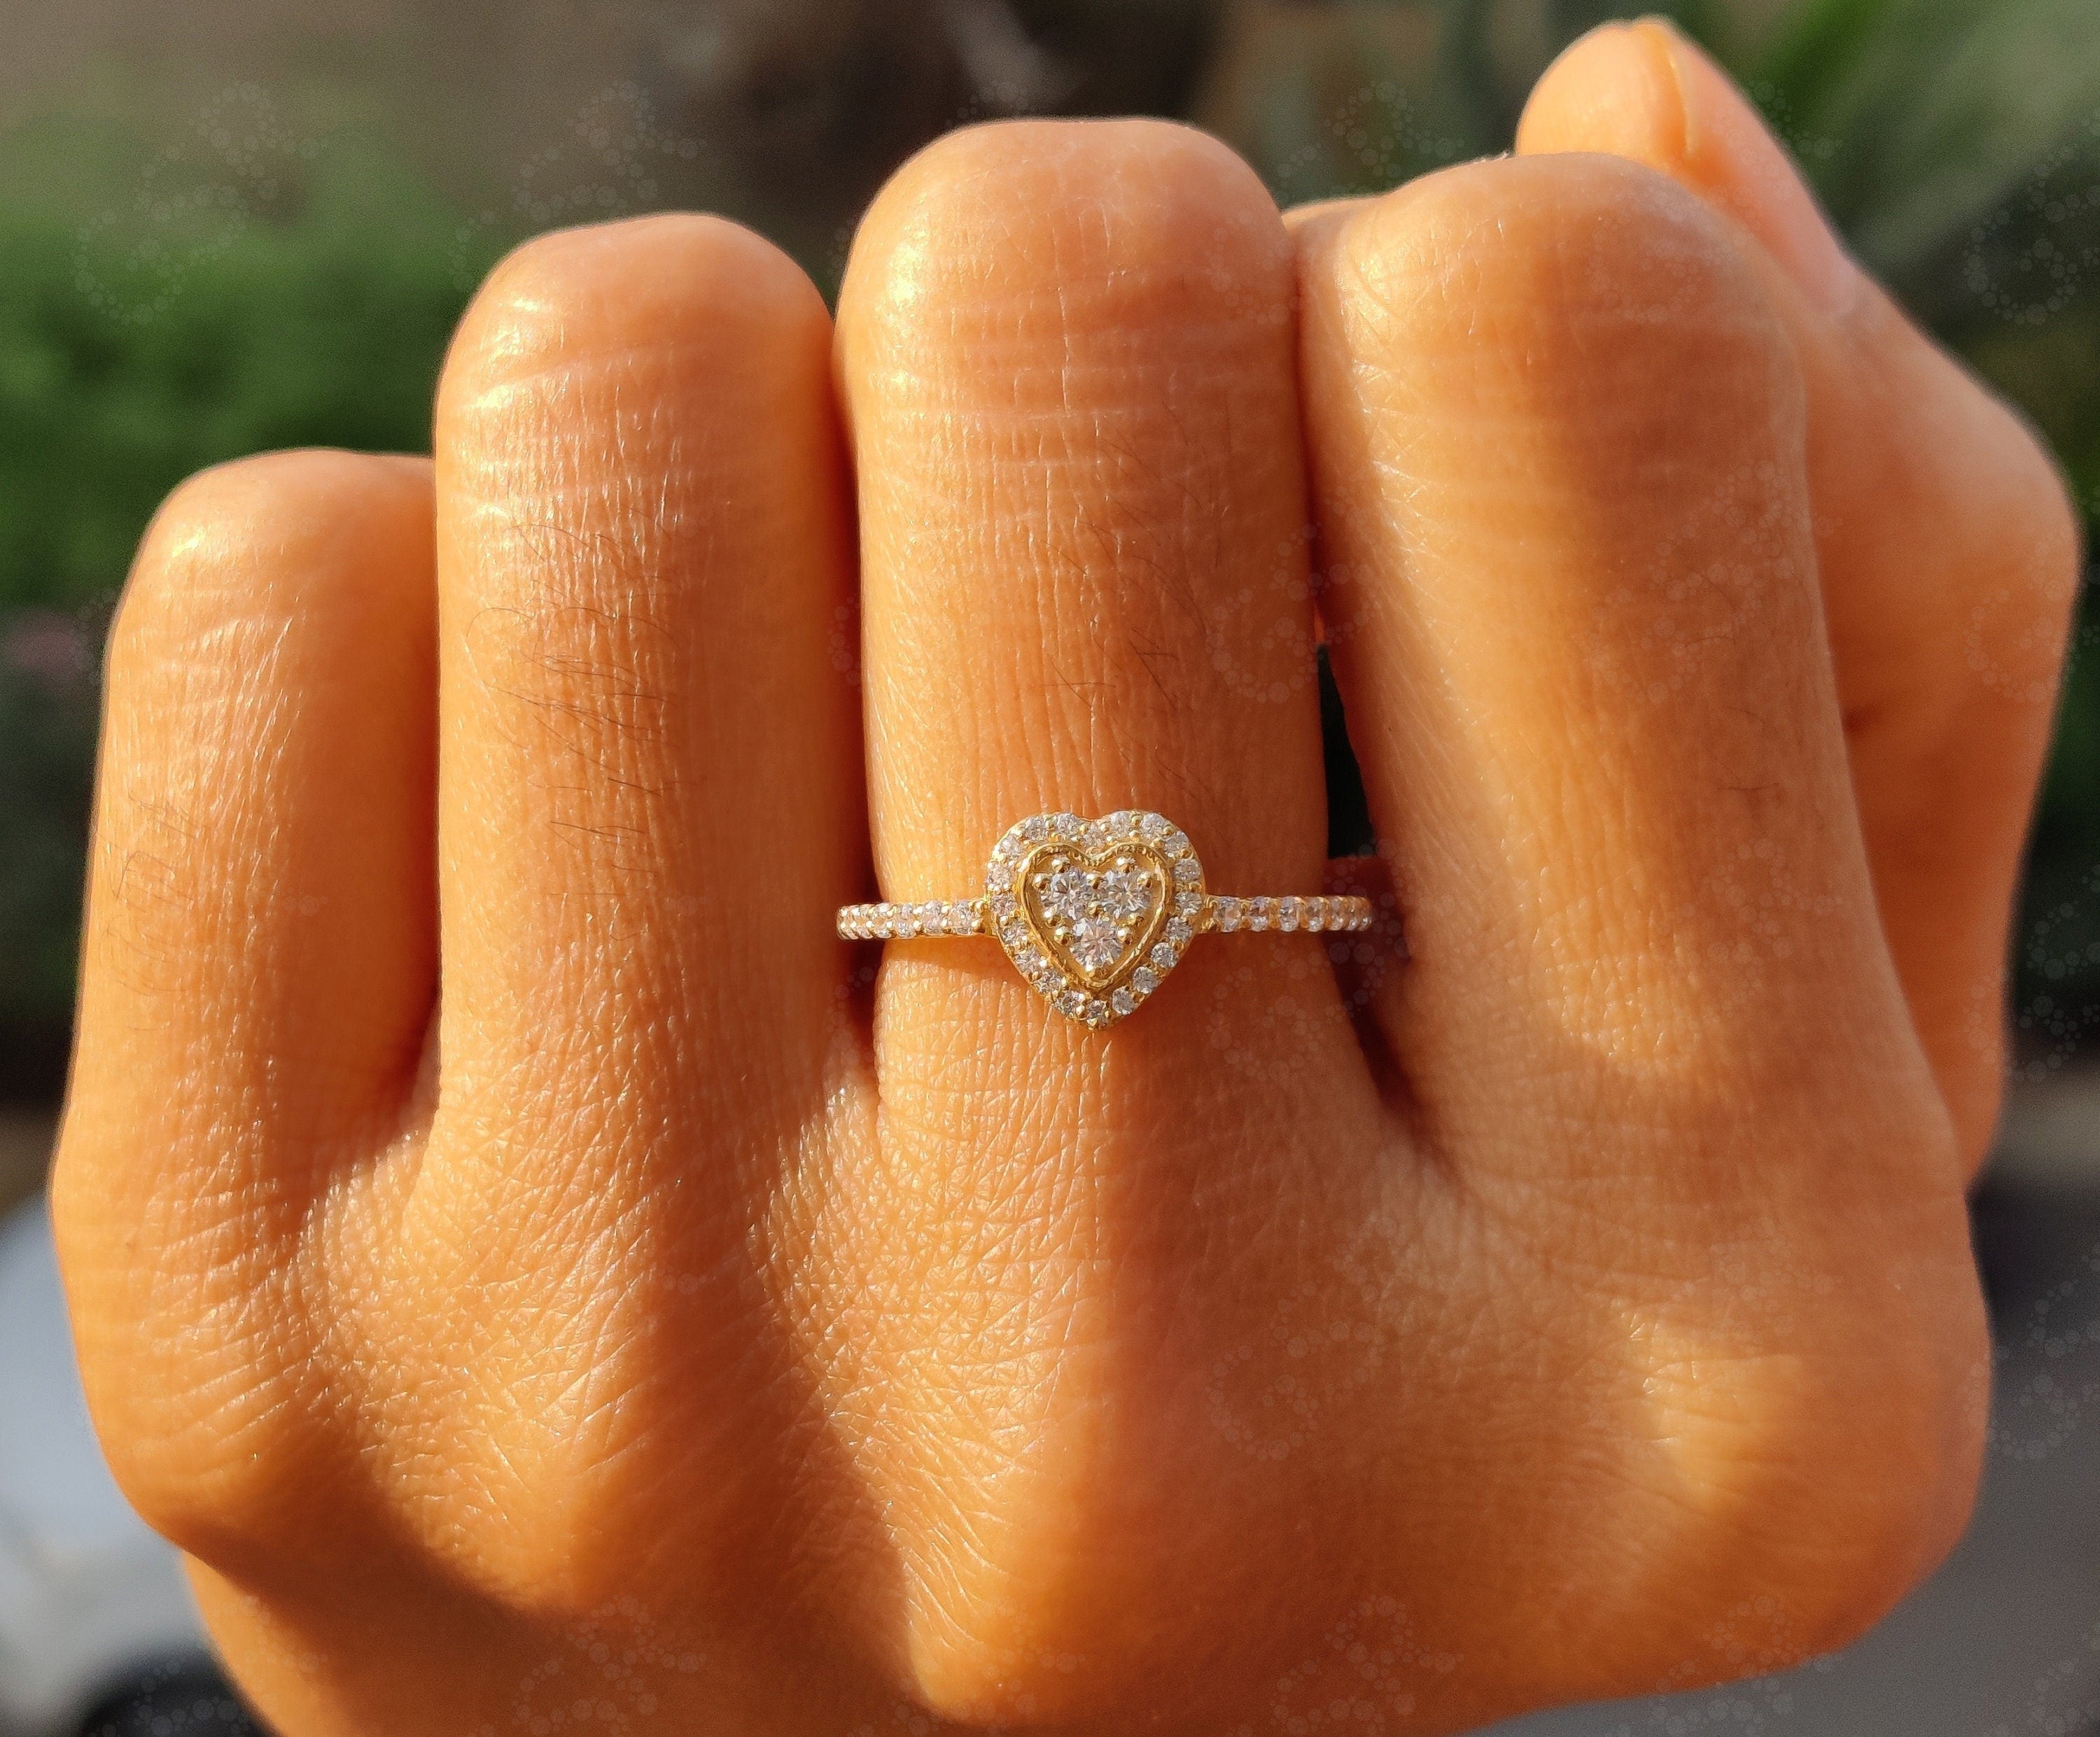 Captivating Love: Heart-Shape Moissanite Ring in Silver and Gold, the Perfect Stackable Ring for a Romantic Statement